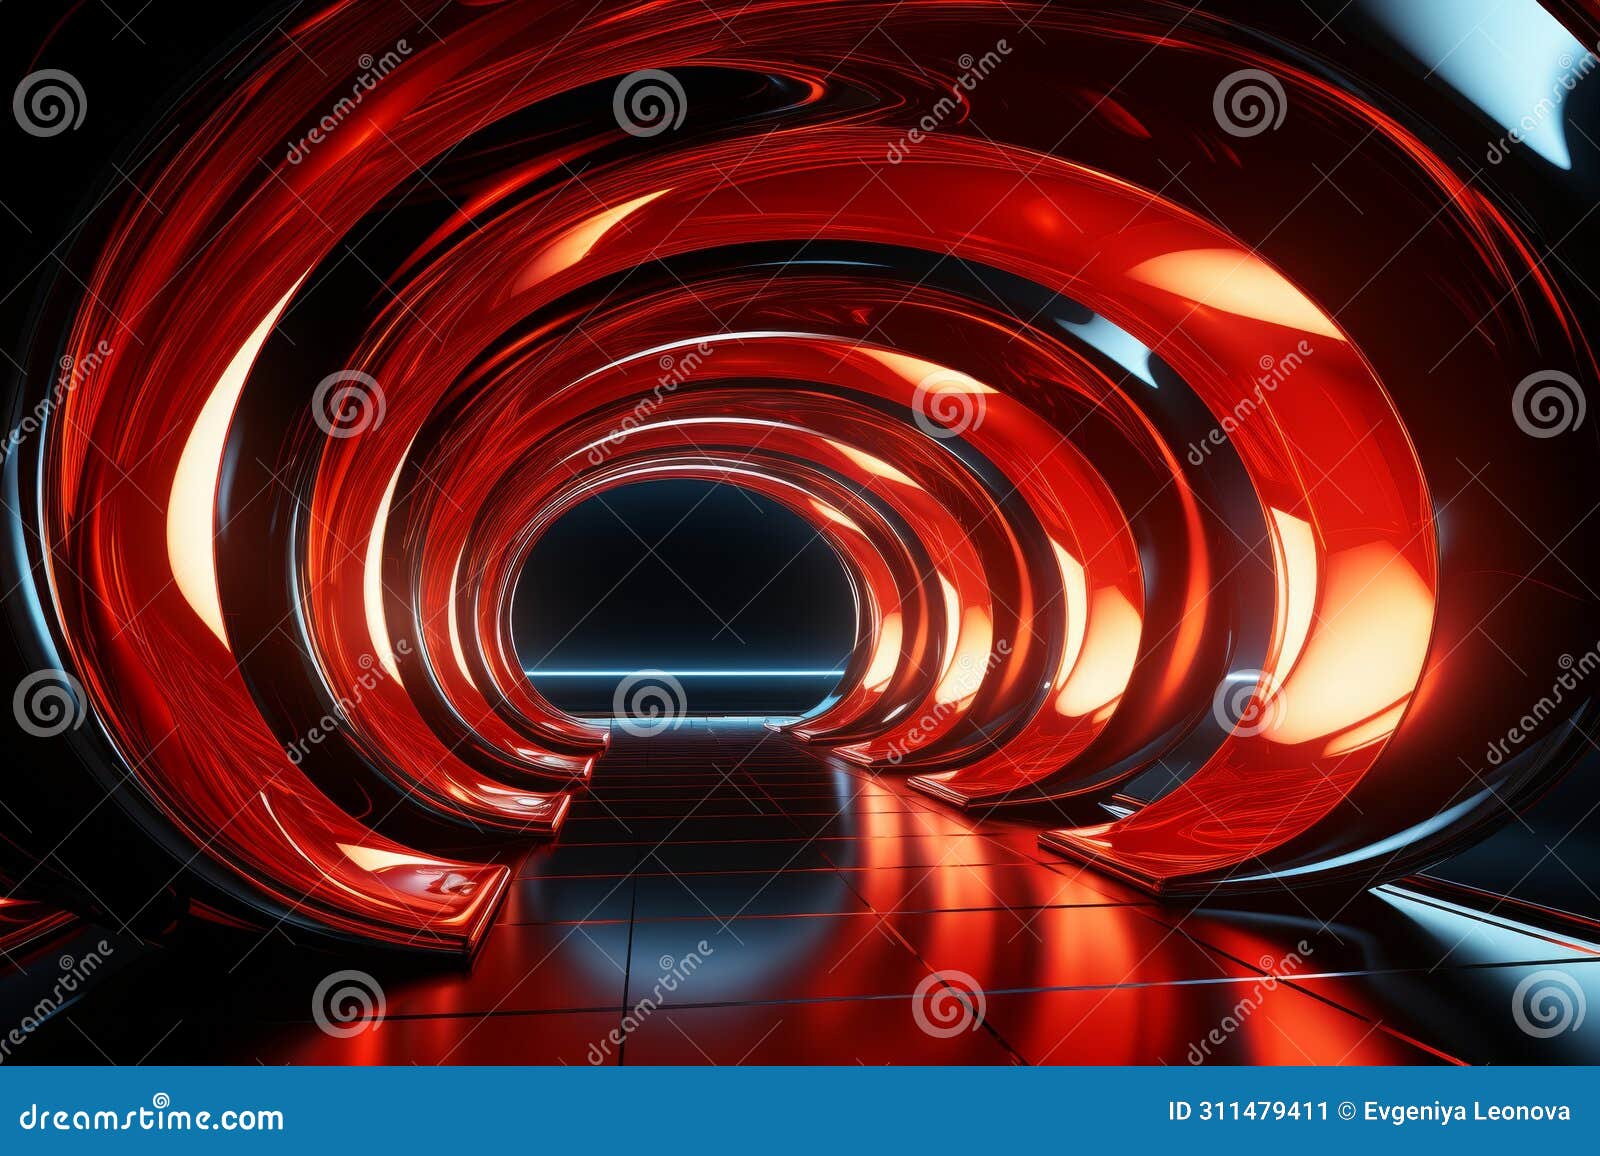 futuristic 3d red grid tunnel or wormhole - cosmic funnel-d spiral technology